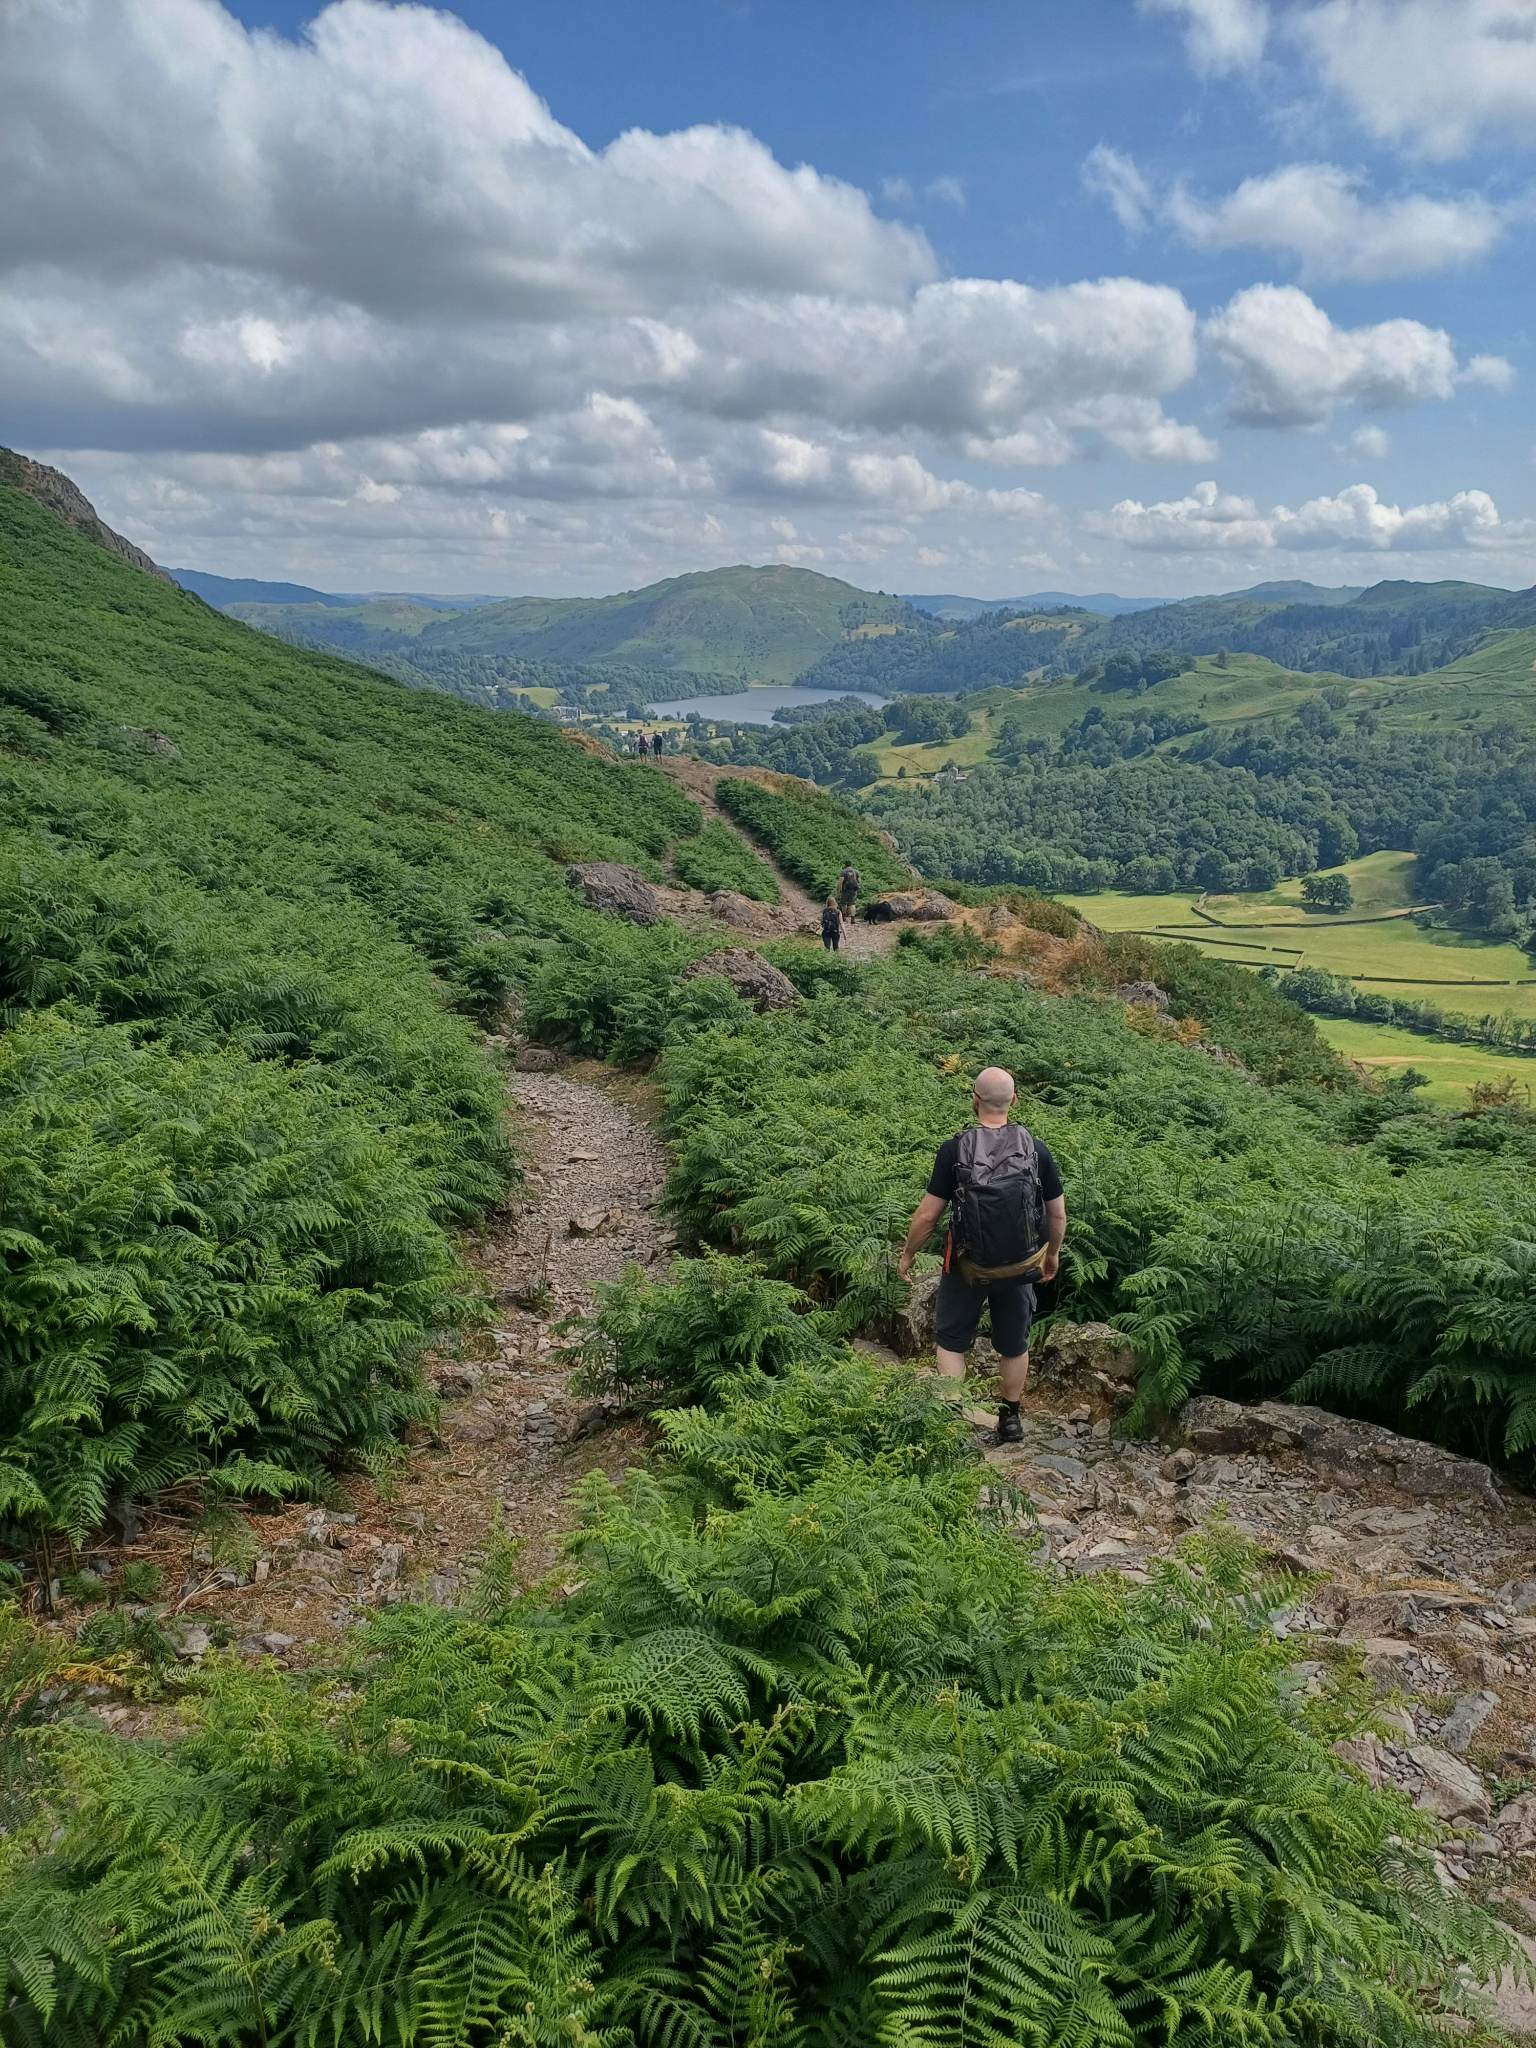 Nab Scar Walking Route in the Lake District National Park